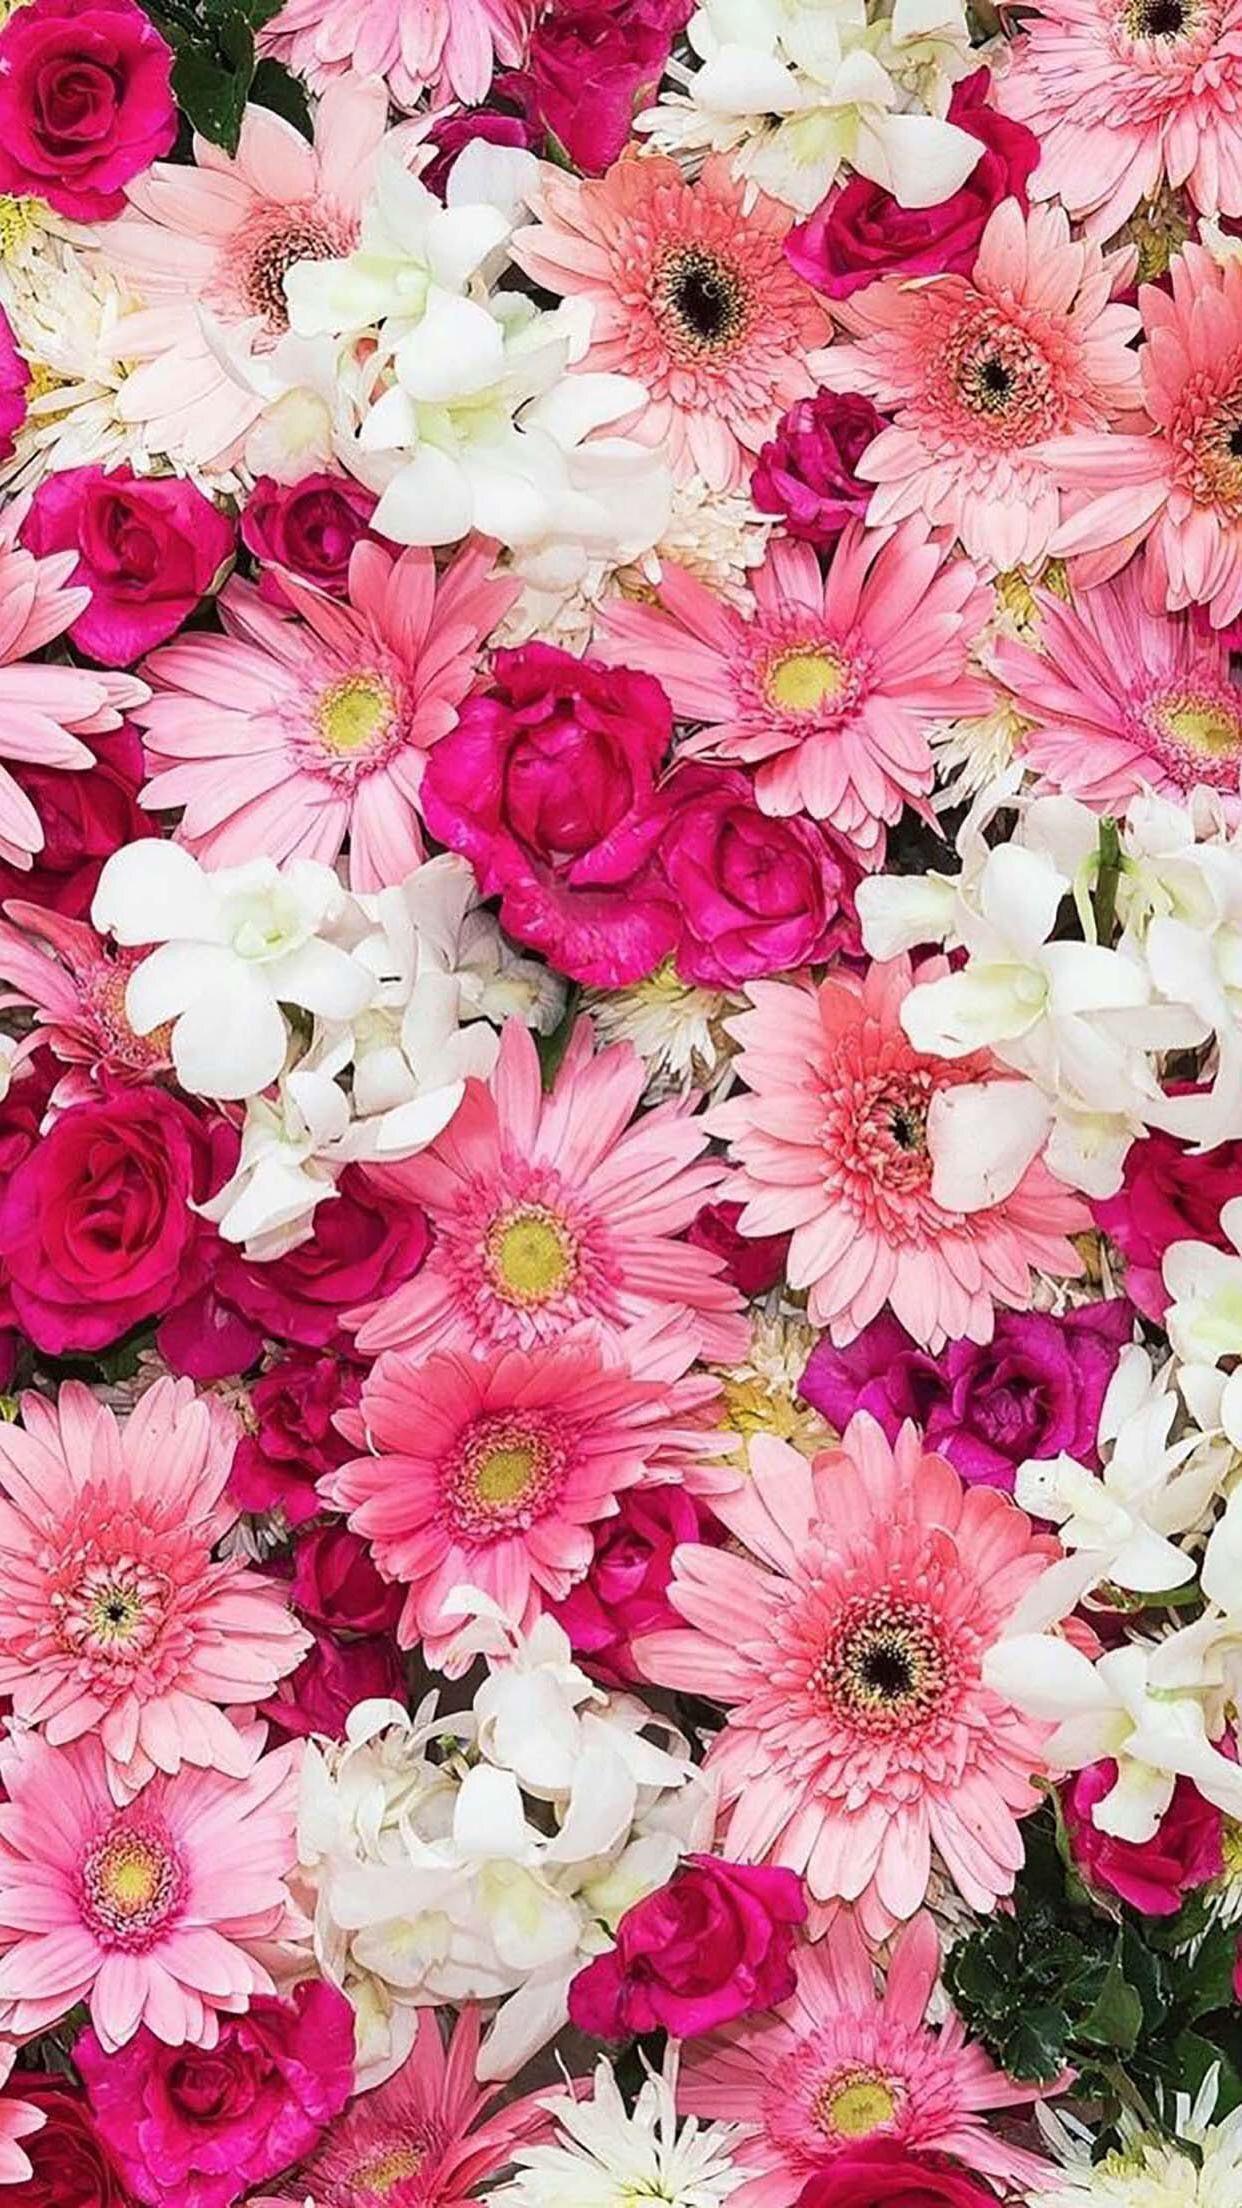 25 Beautiful Flower Wallpapers For iPhone Free Download